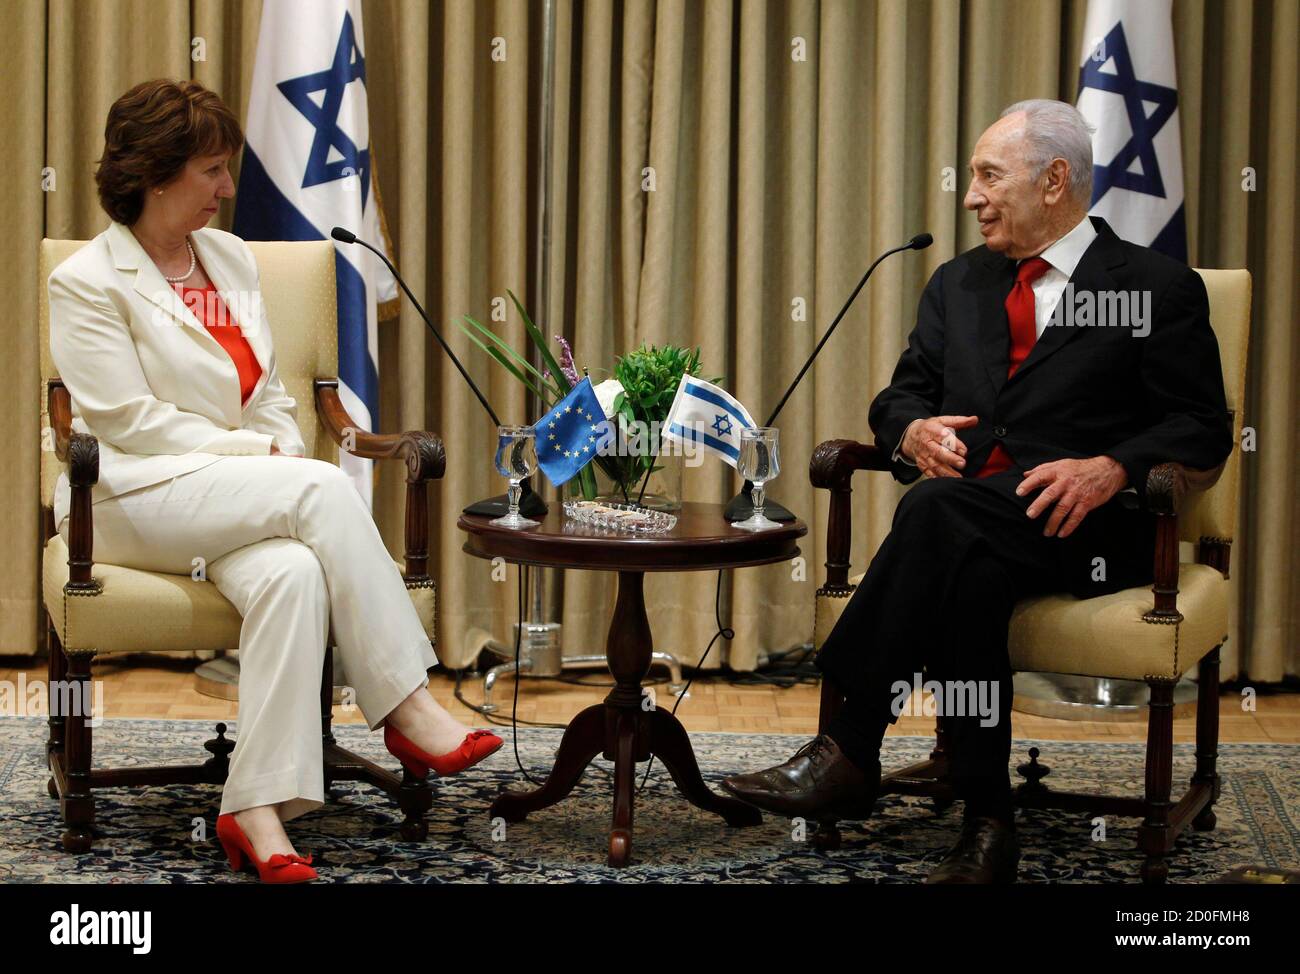 Israel's President Shimon Peres (R) meets European Union Foreign Policy Chief Catherine Ashton in Jerusalem August 28, 2011. REUTERS/Baz Ratner  (JERUSALEM - Tags: POLITICS) Stock Photo